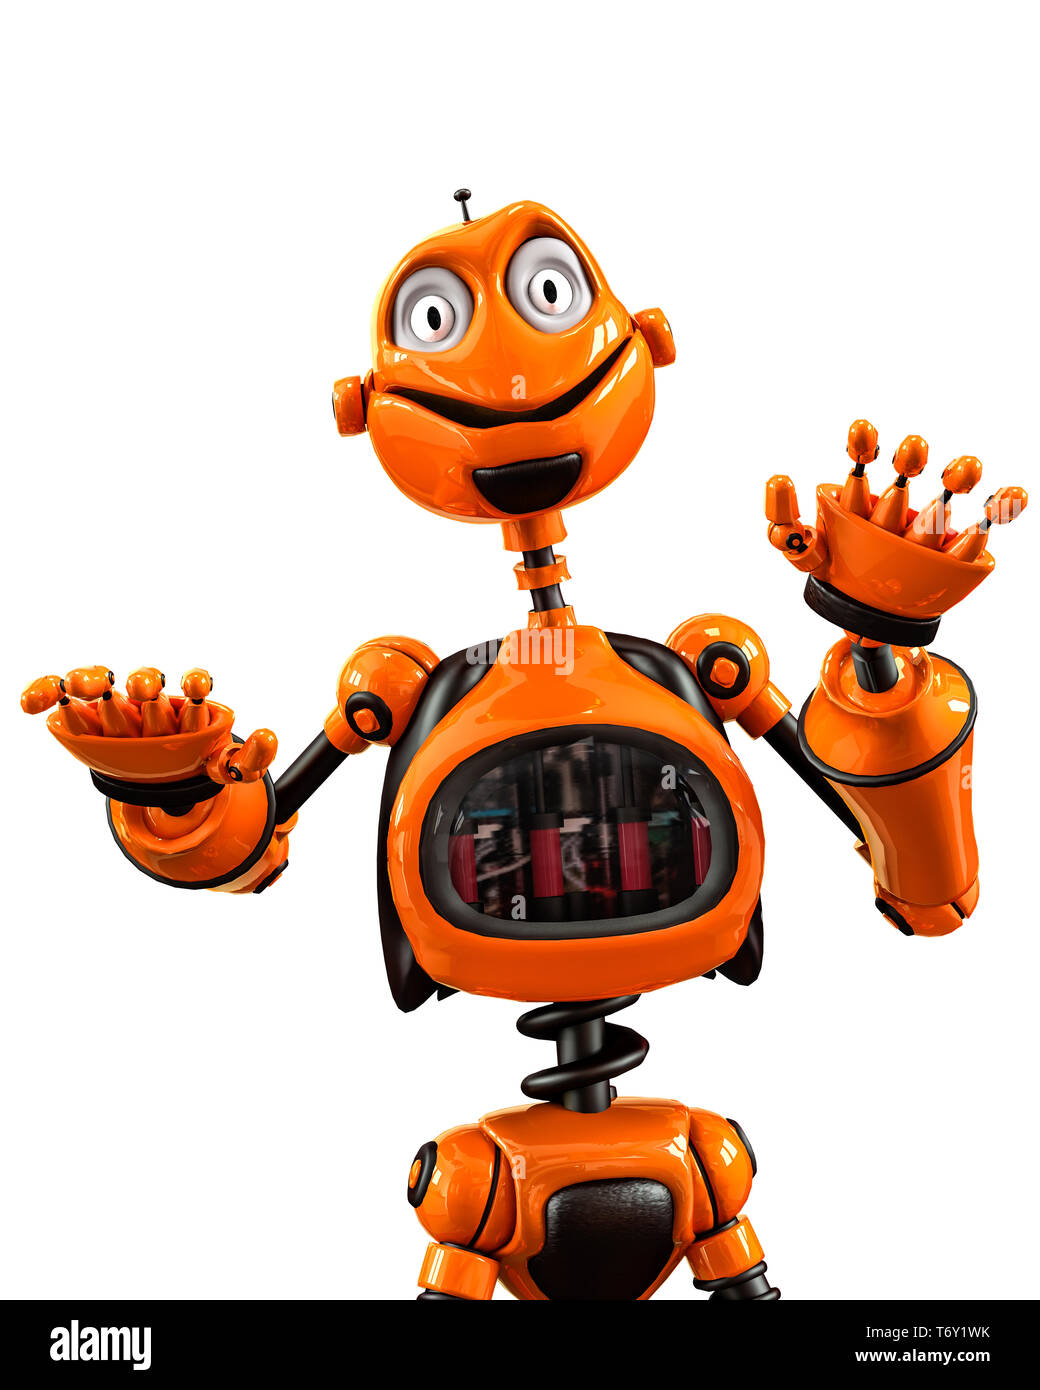 https://c8.alamy.com/comp/T6Y1WK/this-funny-robot-cartoon-this-guy-will-put-some-fun-in-yours-creations-T6Y1WK.jpg